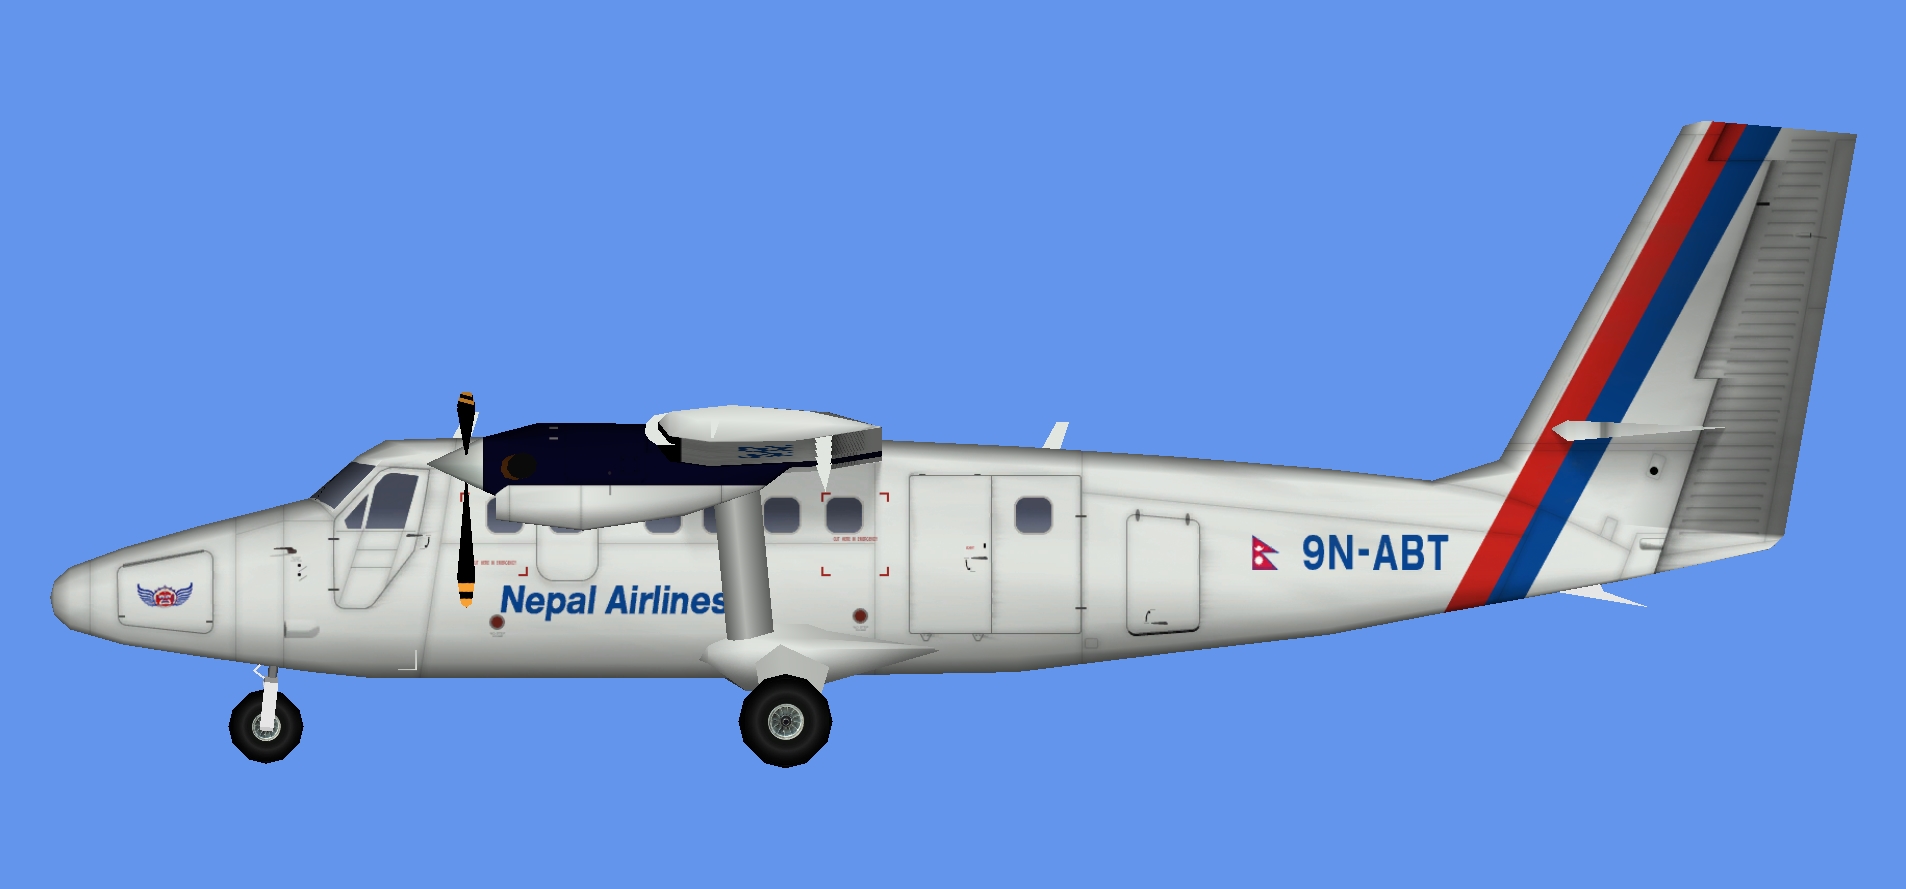 Nepal Airlines DHC-6 300